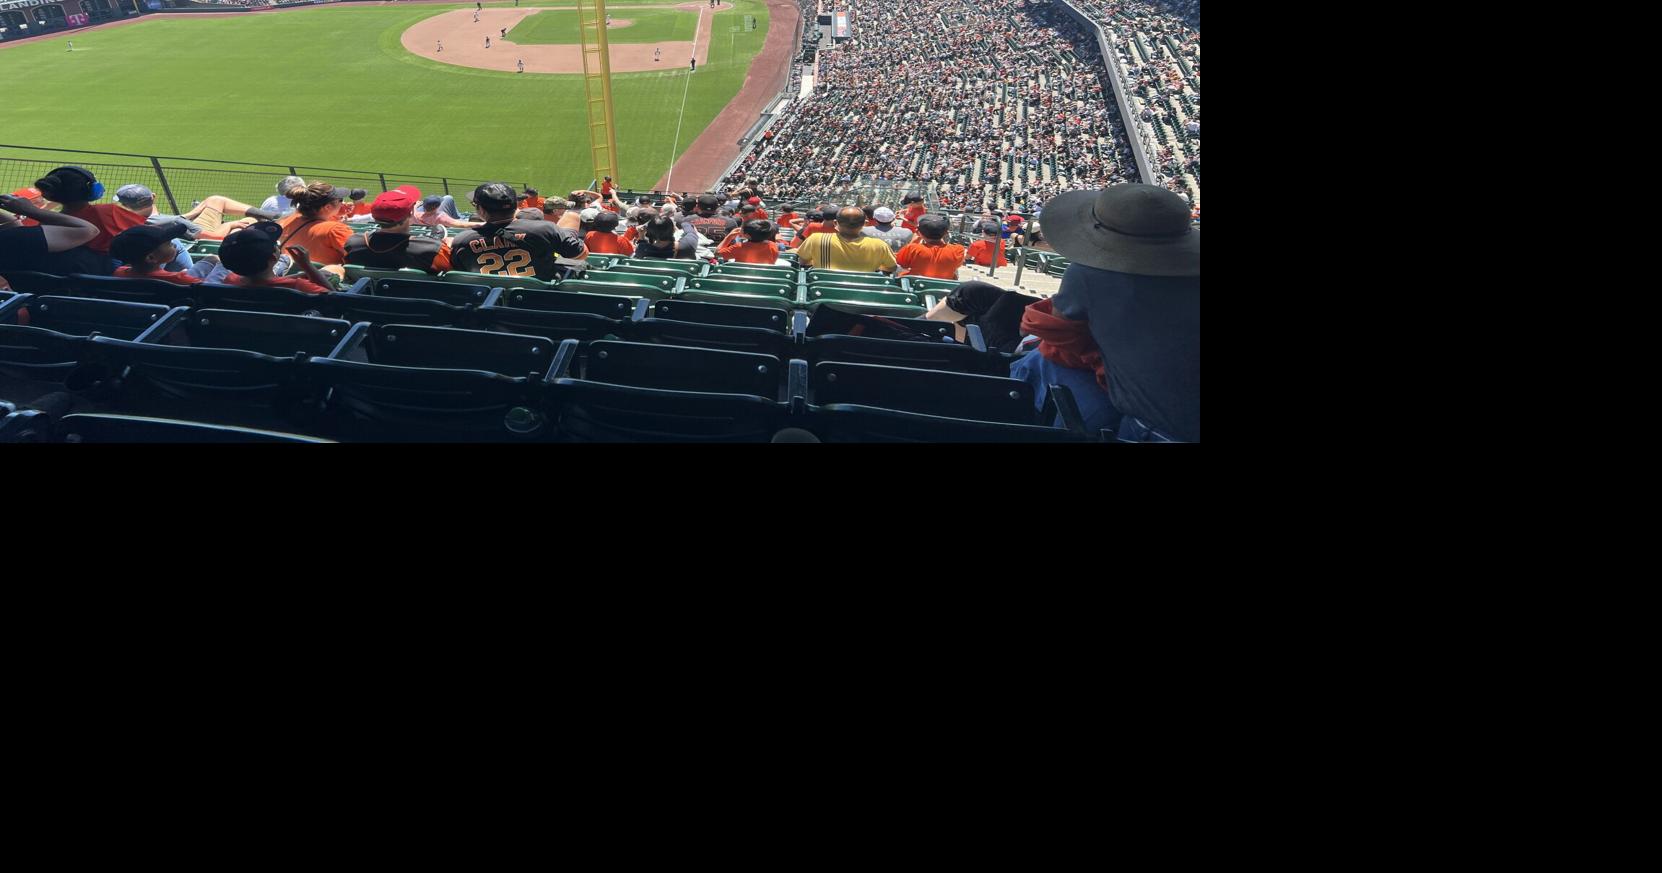 The worst seat at a Giants game? An Examiner expedition to Oracle